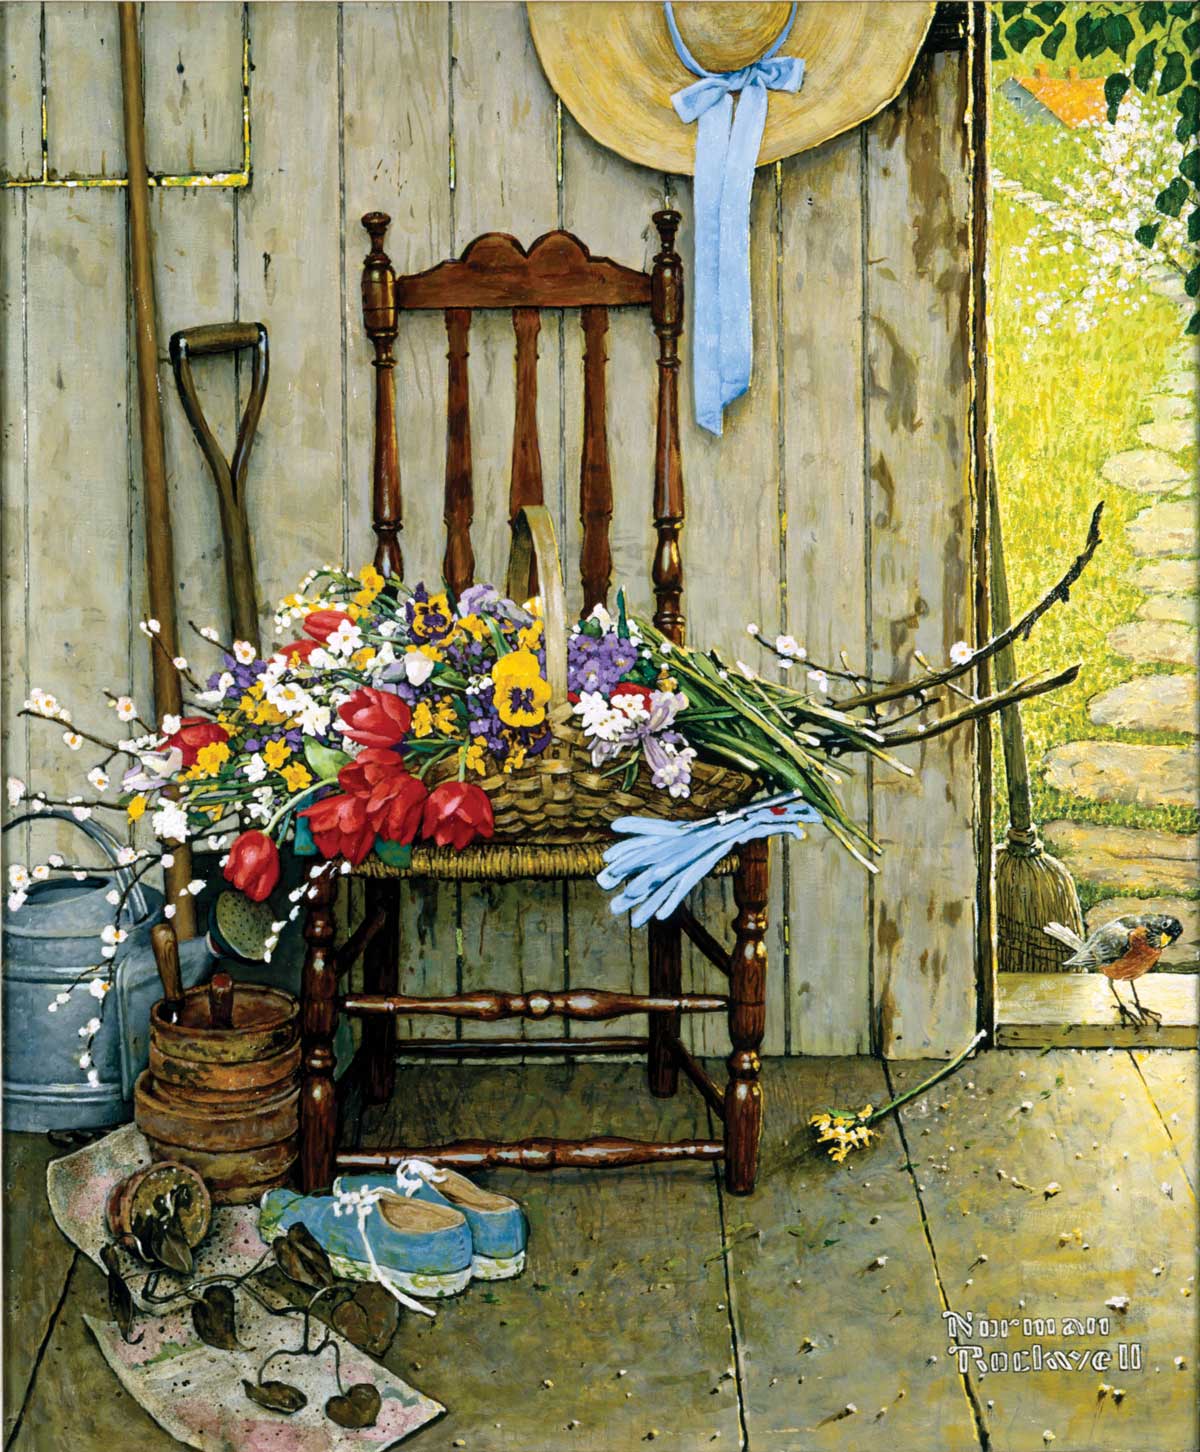 "Spring Flowers," Norman Rockwell. 1969. Oil on canvas, 30 3/8" x 25". Story illustration for "McCall's," May 1969. Norman Rockwell Museum Collections. ©NRELC: Niles, IL.